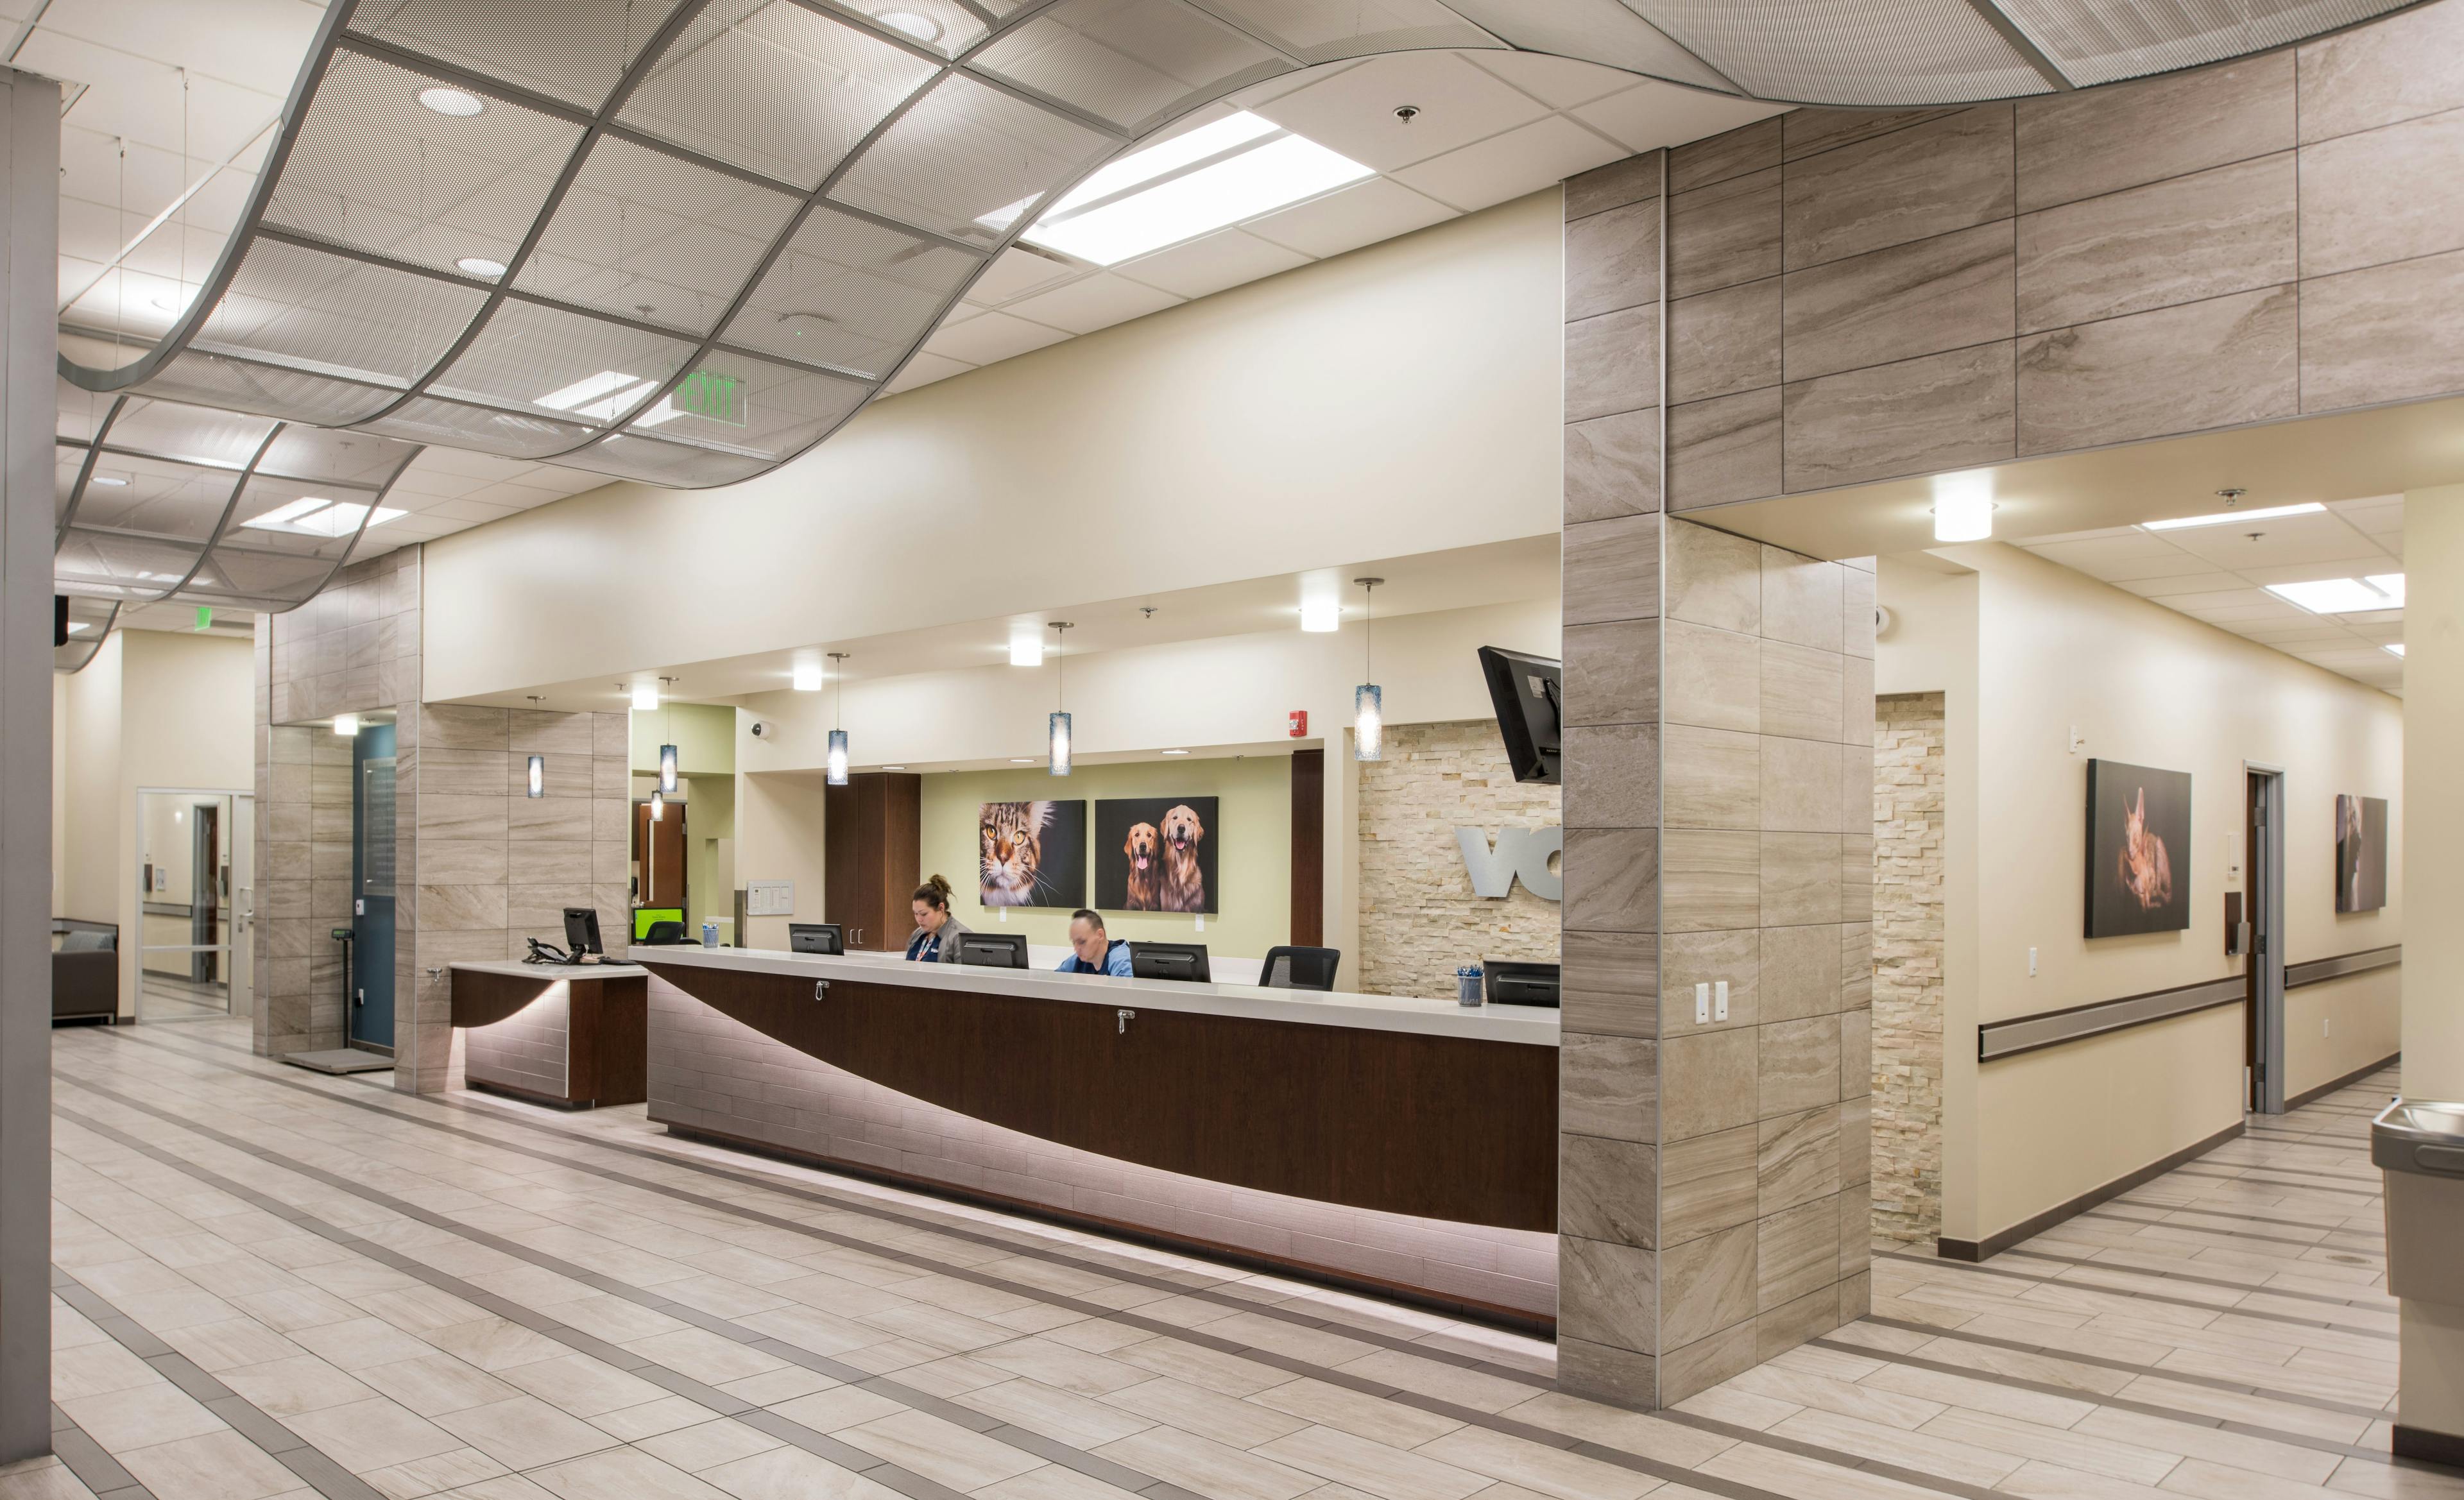 The reception area features neutral tones and separate dog and cat waiting areas to soothe and comfort arriving clients. A decorative wave feature hangs from the lobby ceiling, mimicking the ocean, a motif that is repeated elsewhere in the hospital.